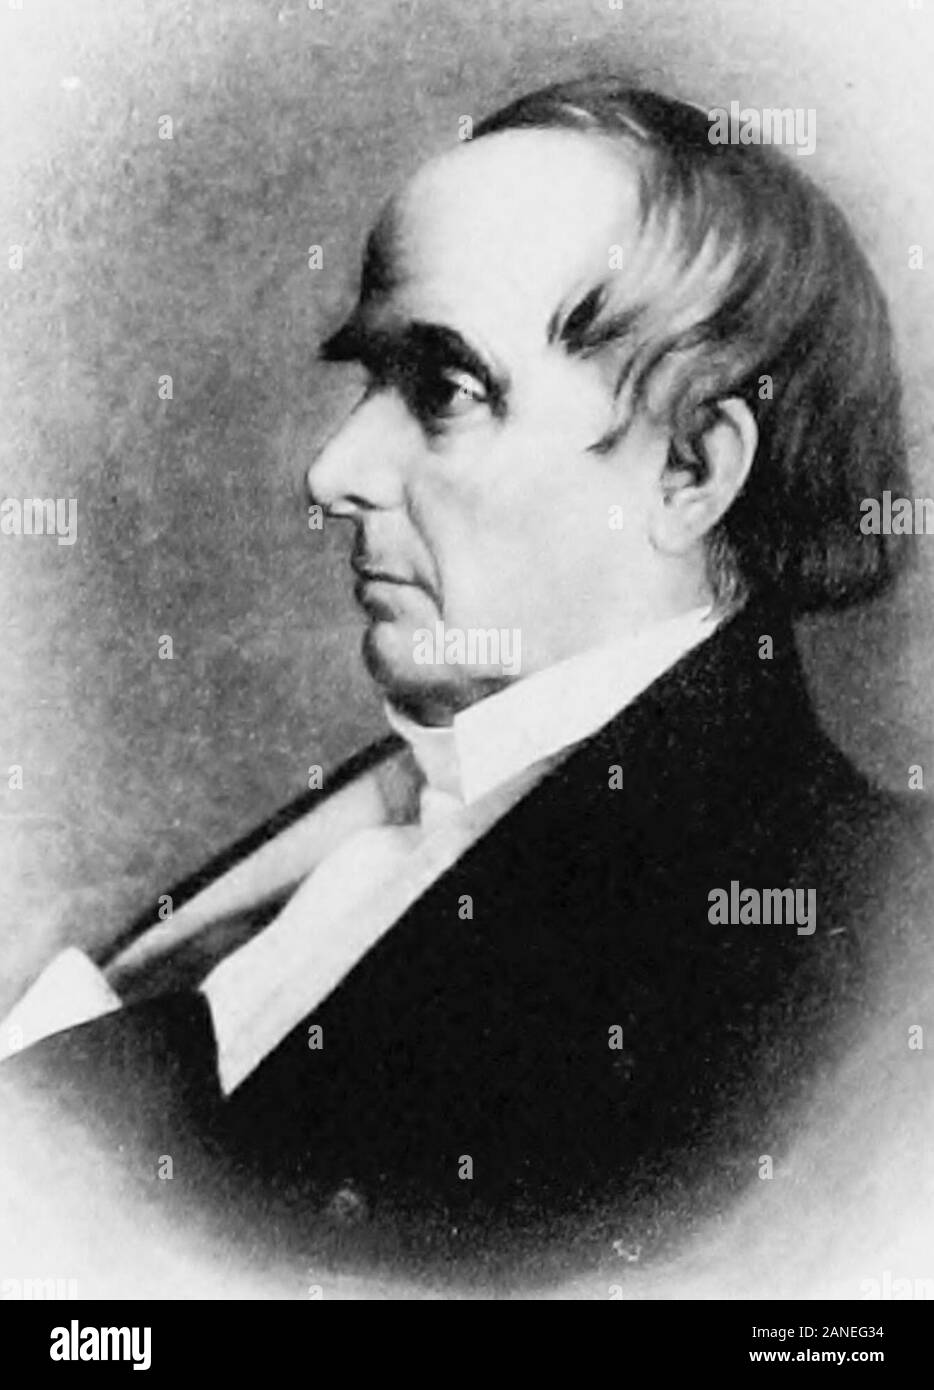 The writings and speeches of Daniel Webster .. . sa public man or